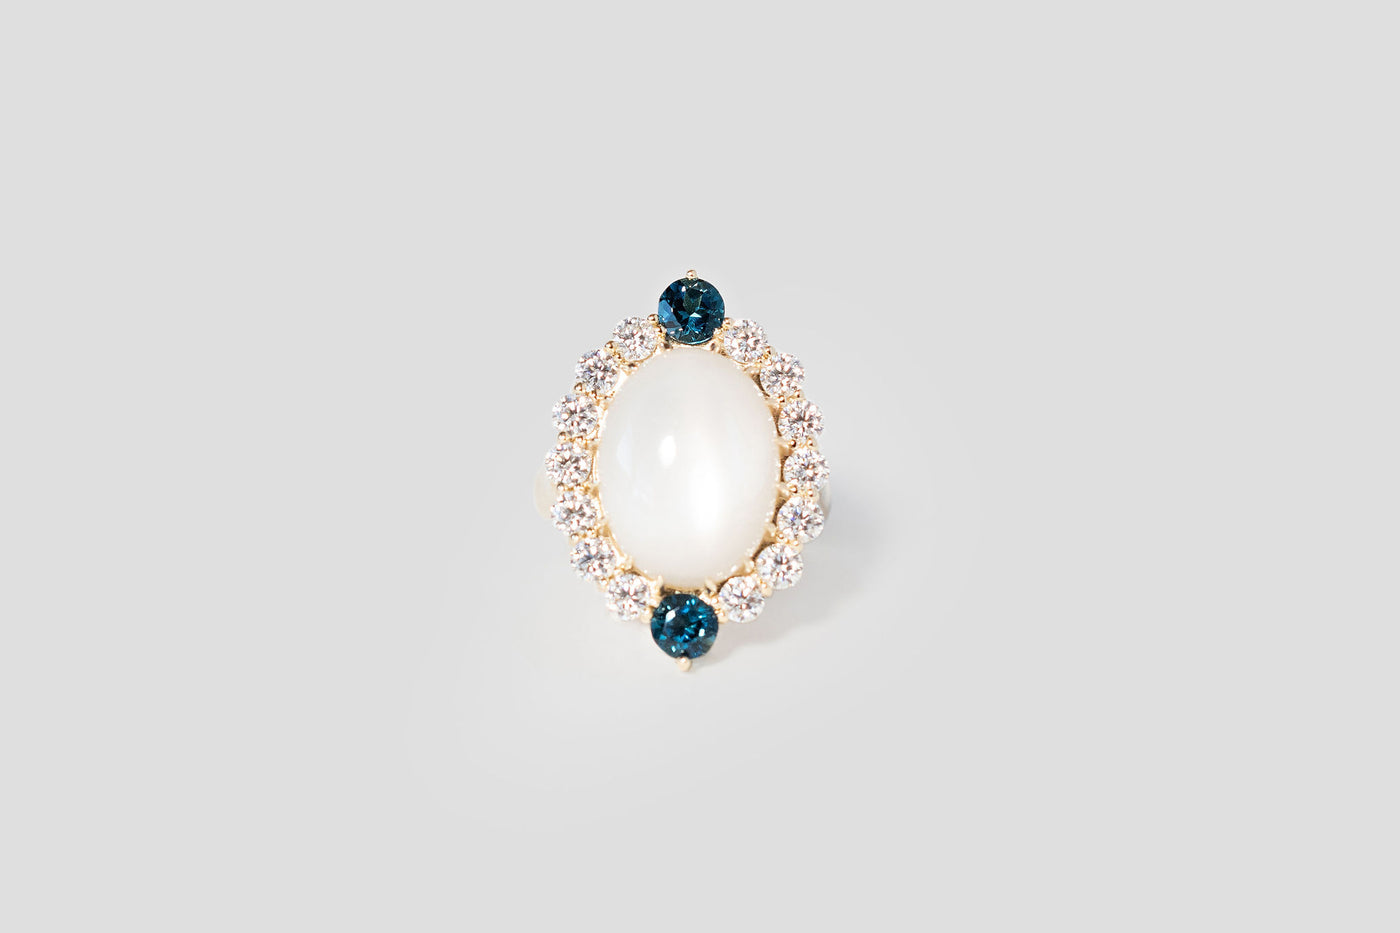 10ct Moonstone and Blue Topaz Ring - 10k Gold